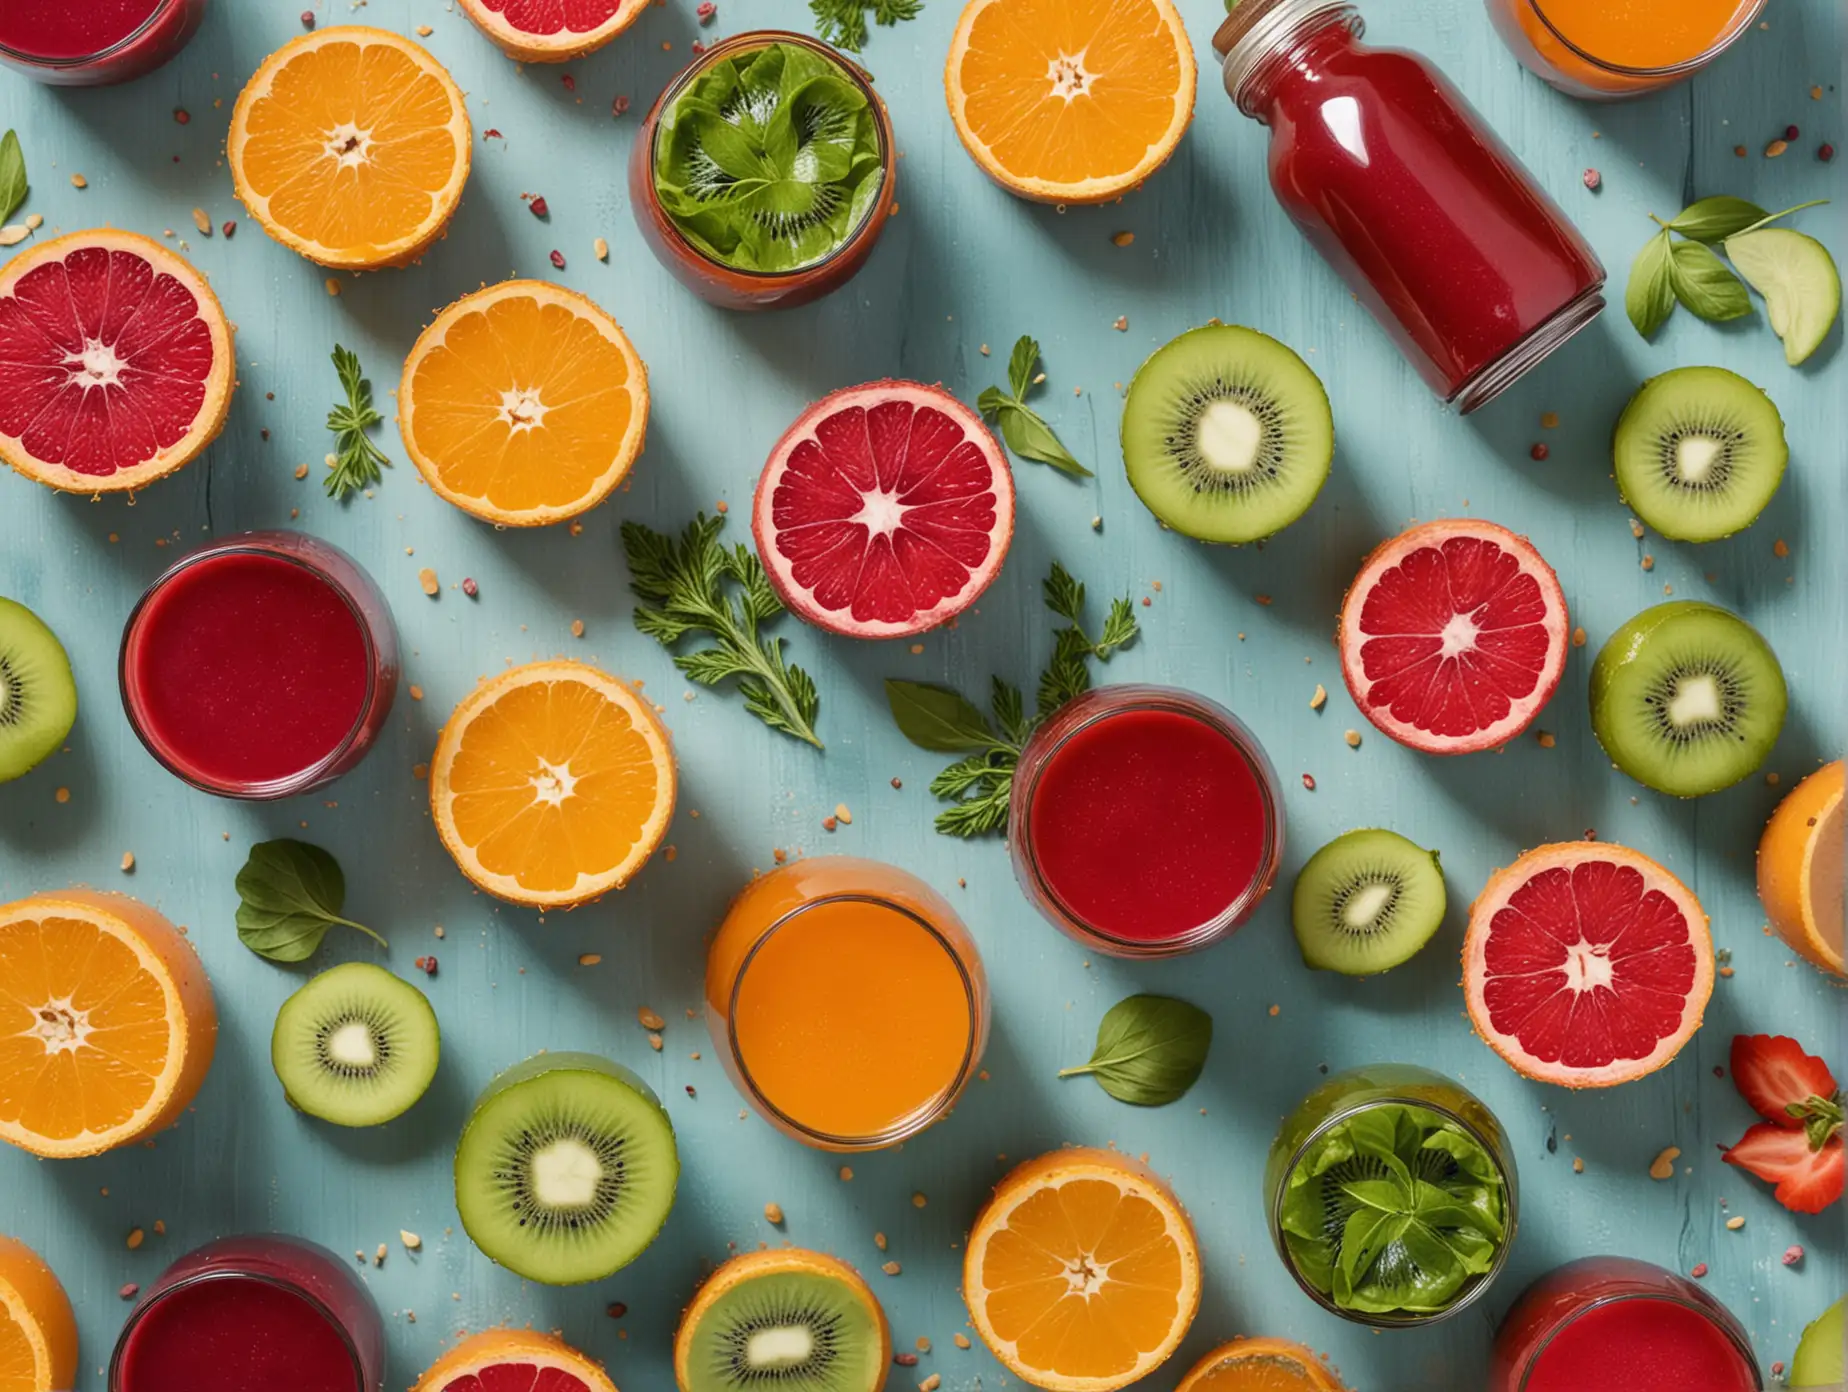 could you create some stock photos of cold pressed fruit and vegetable juice, make them vibrant, have fruits and vegetables around the juices